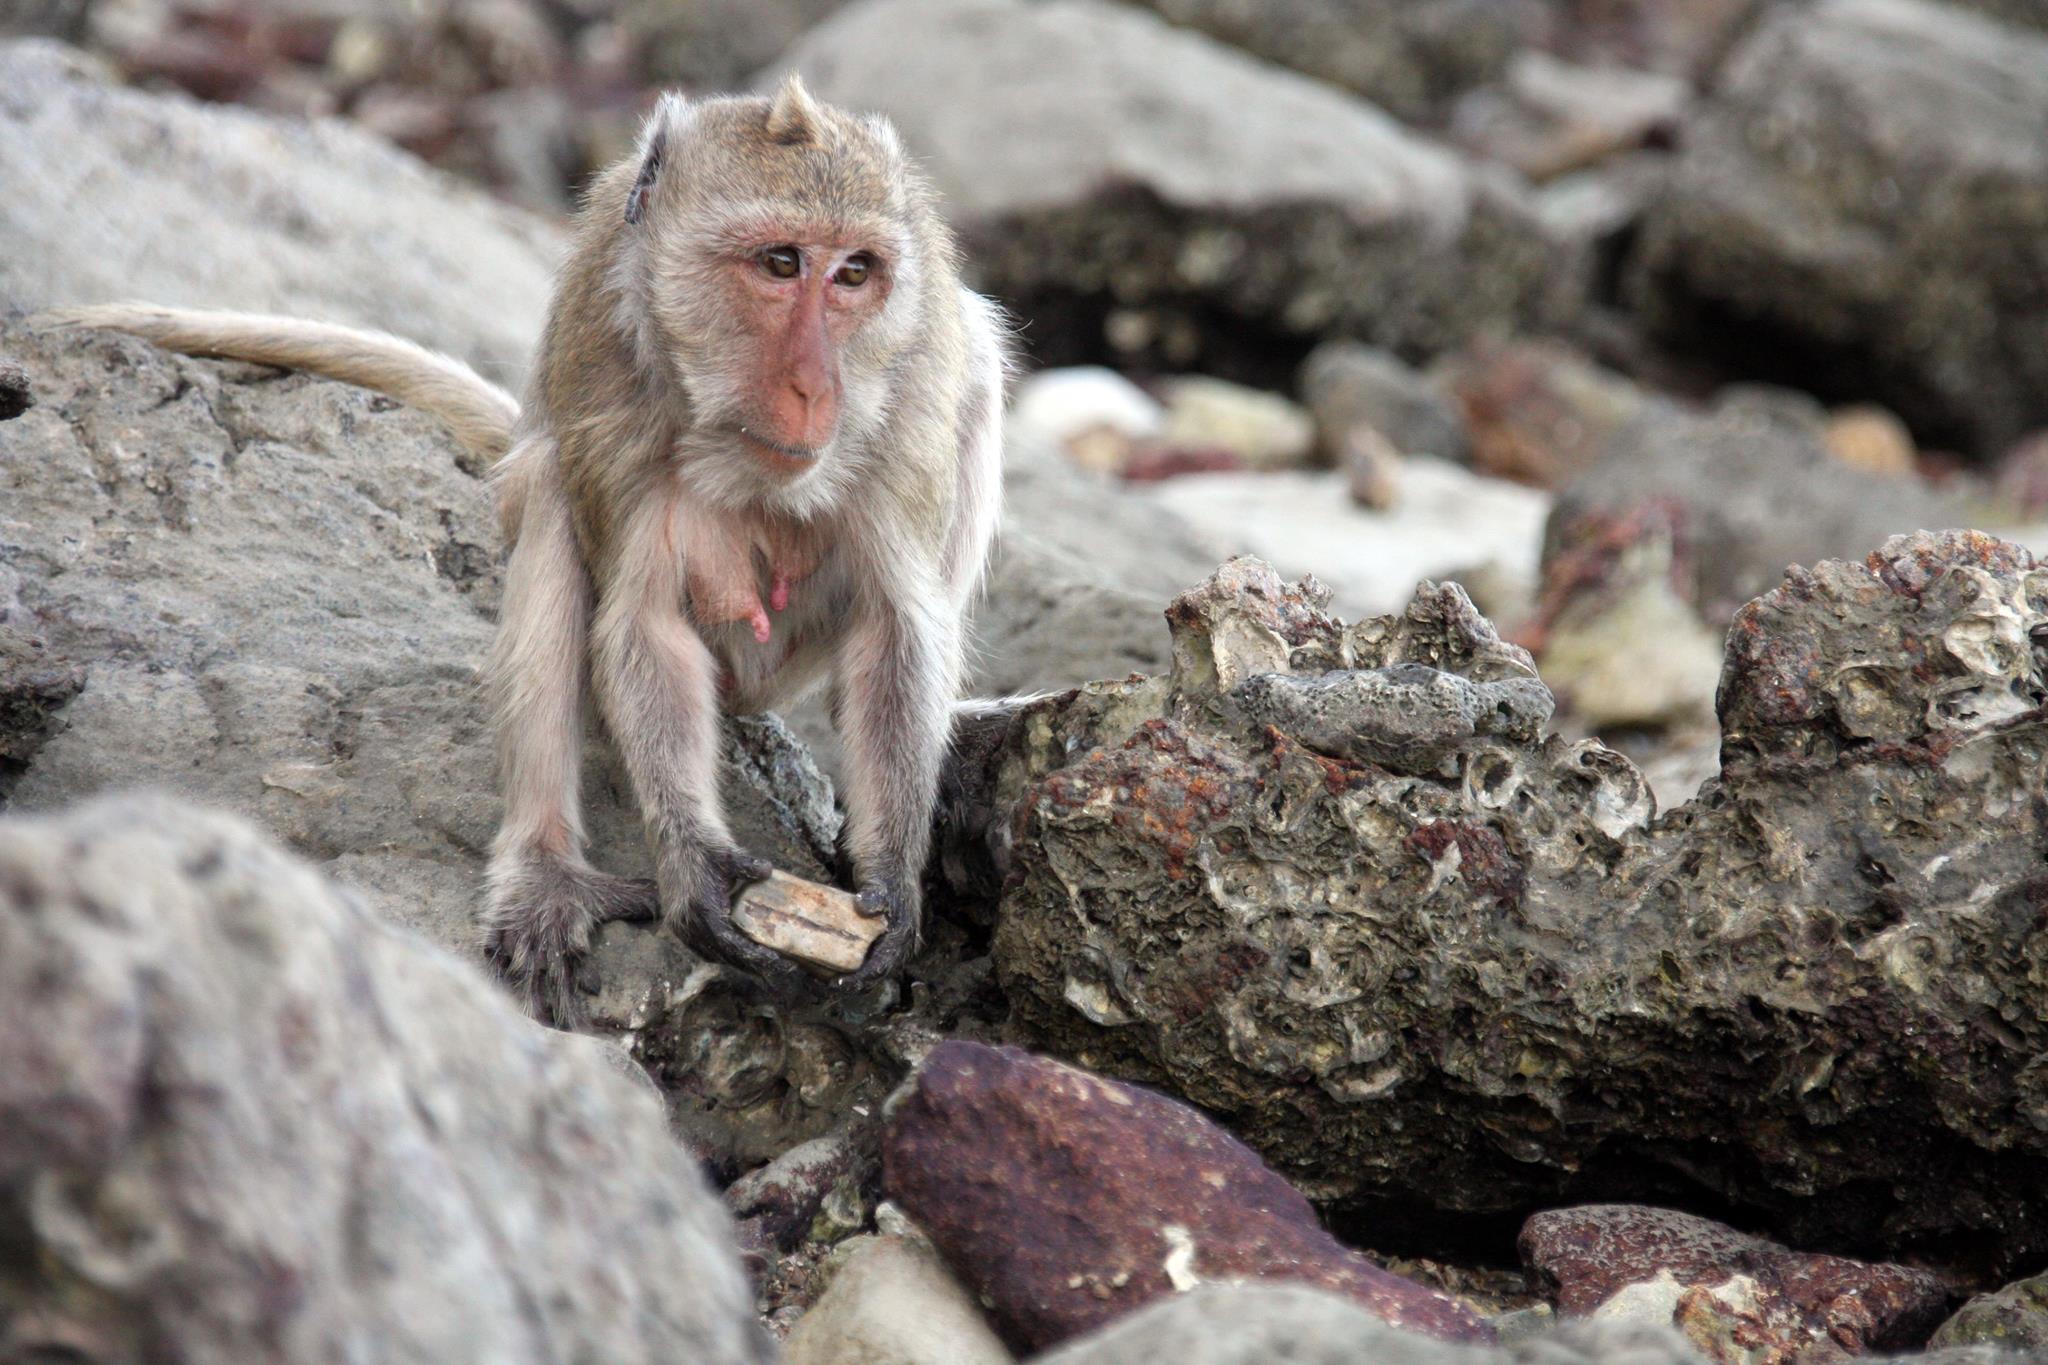 Monkey tool use threatens prey numbers, say researchers